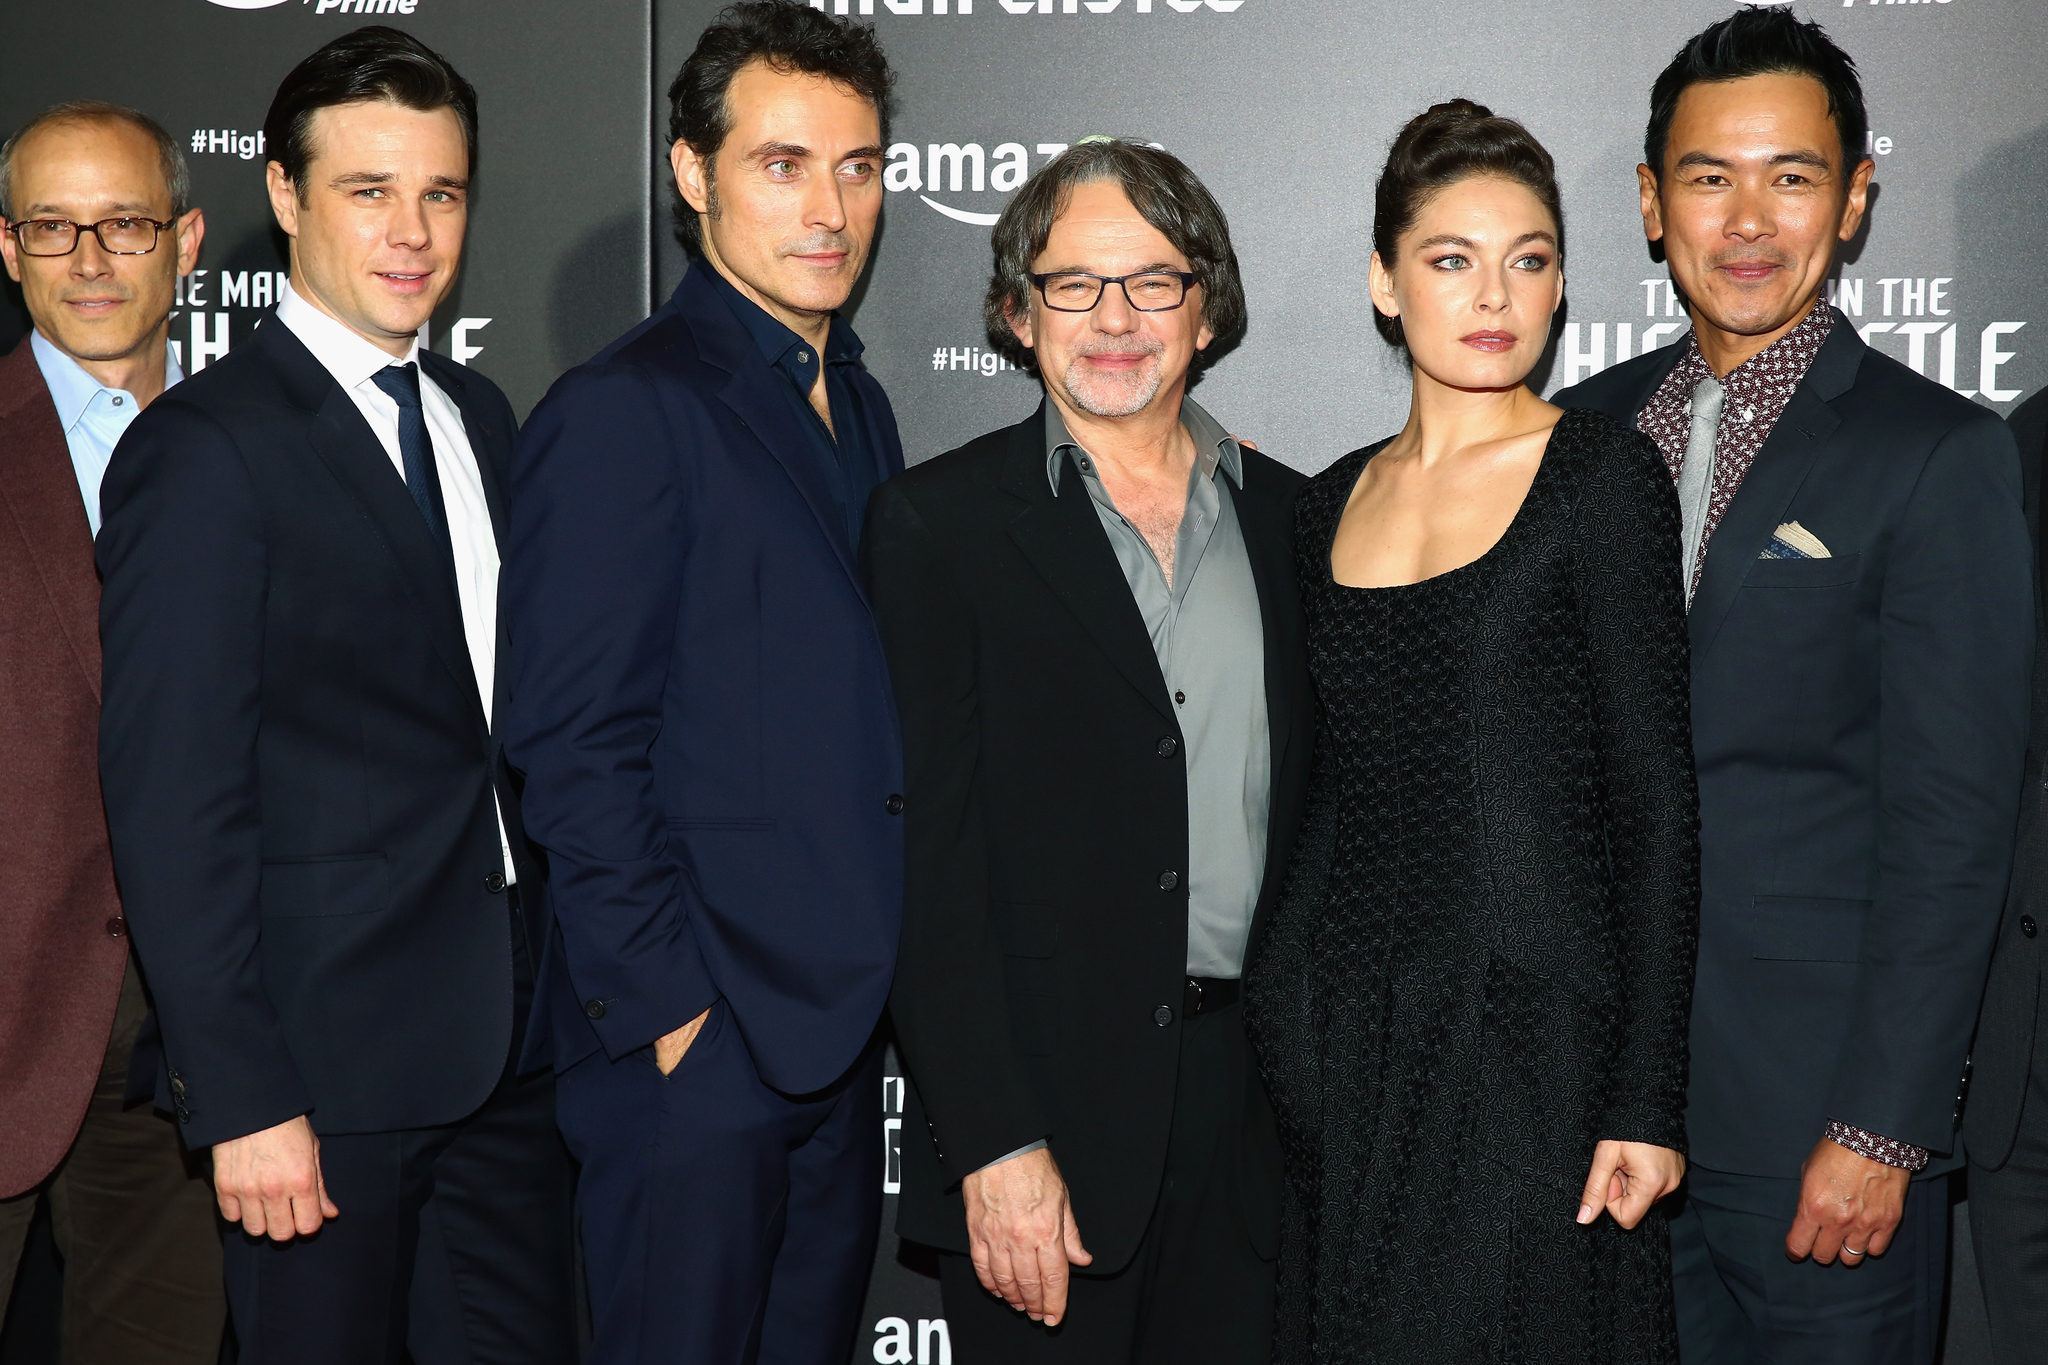 Rufus Sewell, David Zucker, Frank Spotnitz, Alexa Davalos and Rupert Evans at event of The Man in the High Castle (2015)